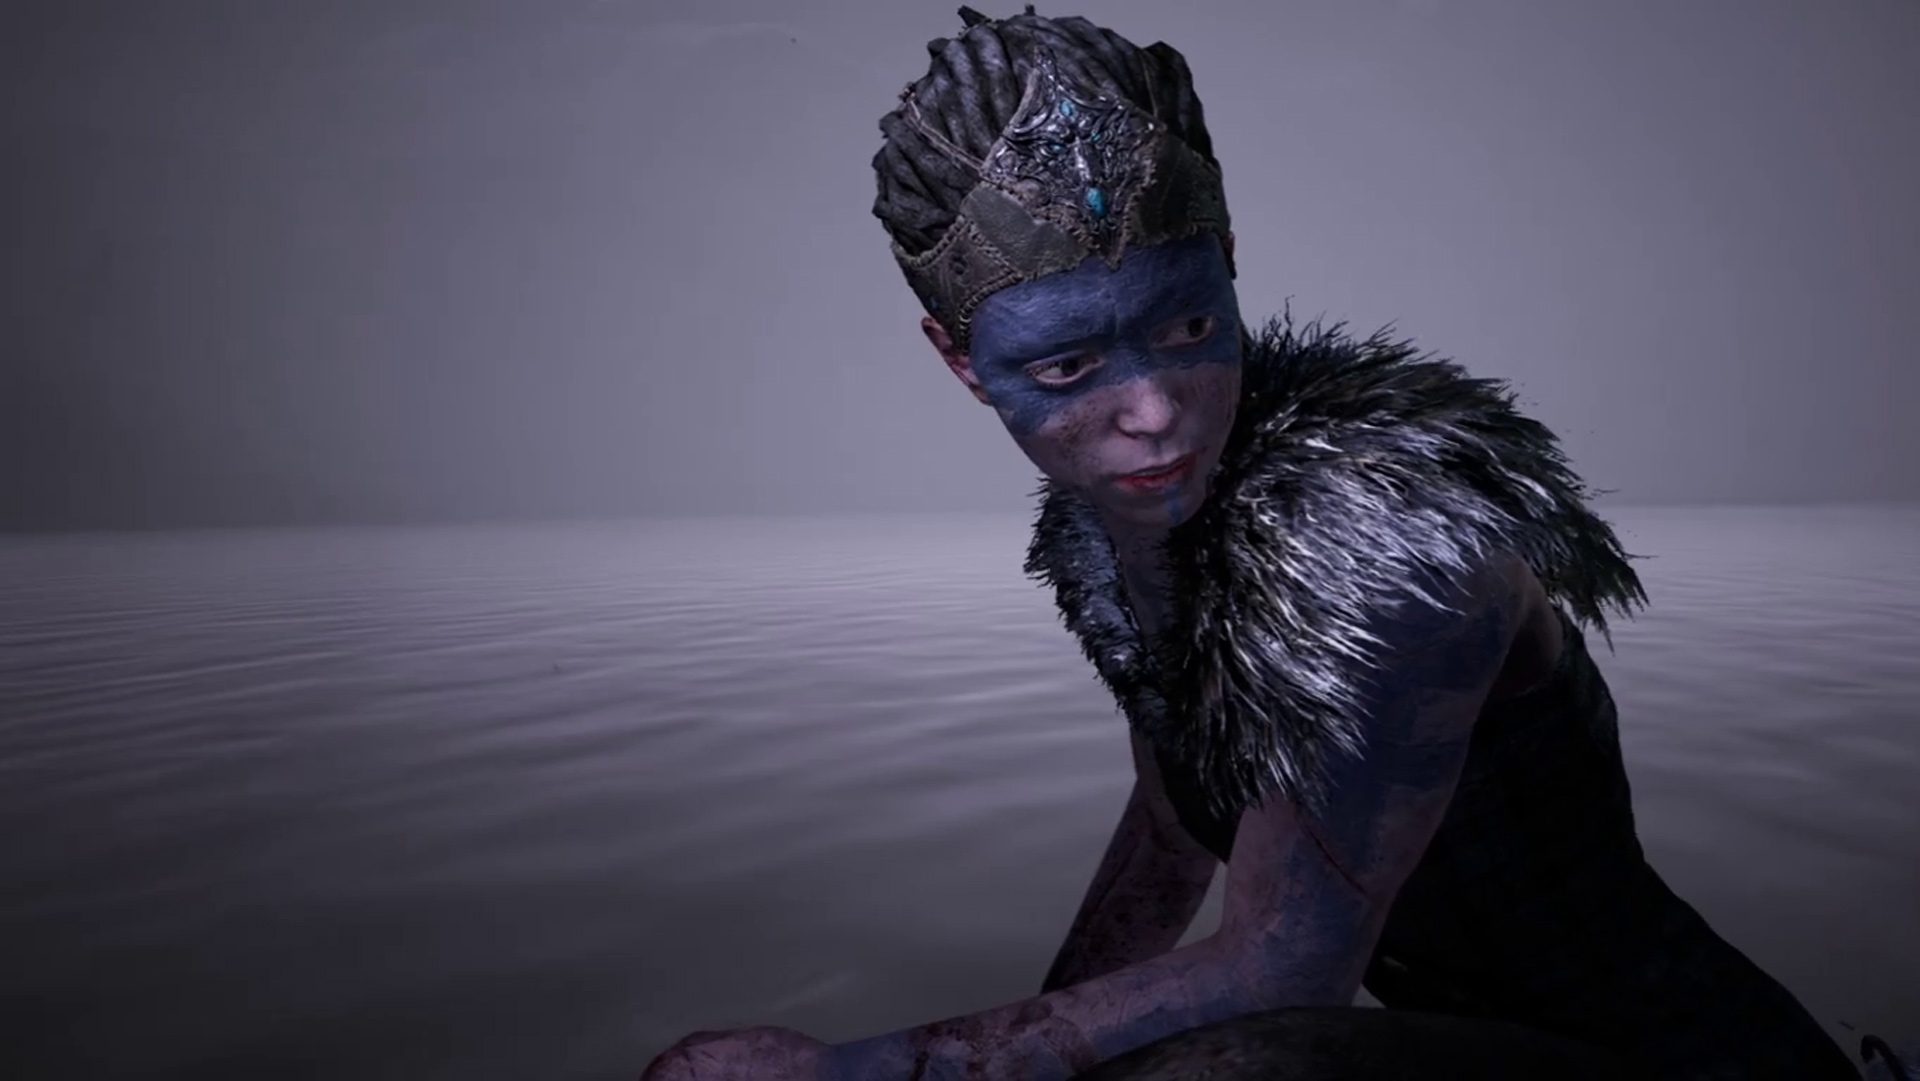 Hellblade 2 looks frighteningly real in new Unreal Engine 5 tech